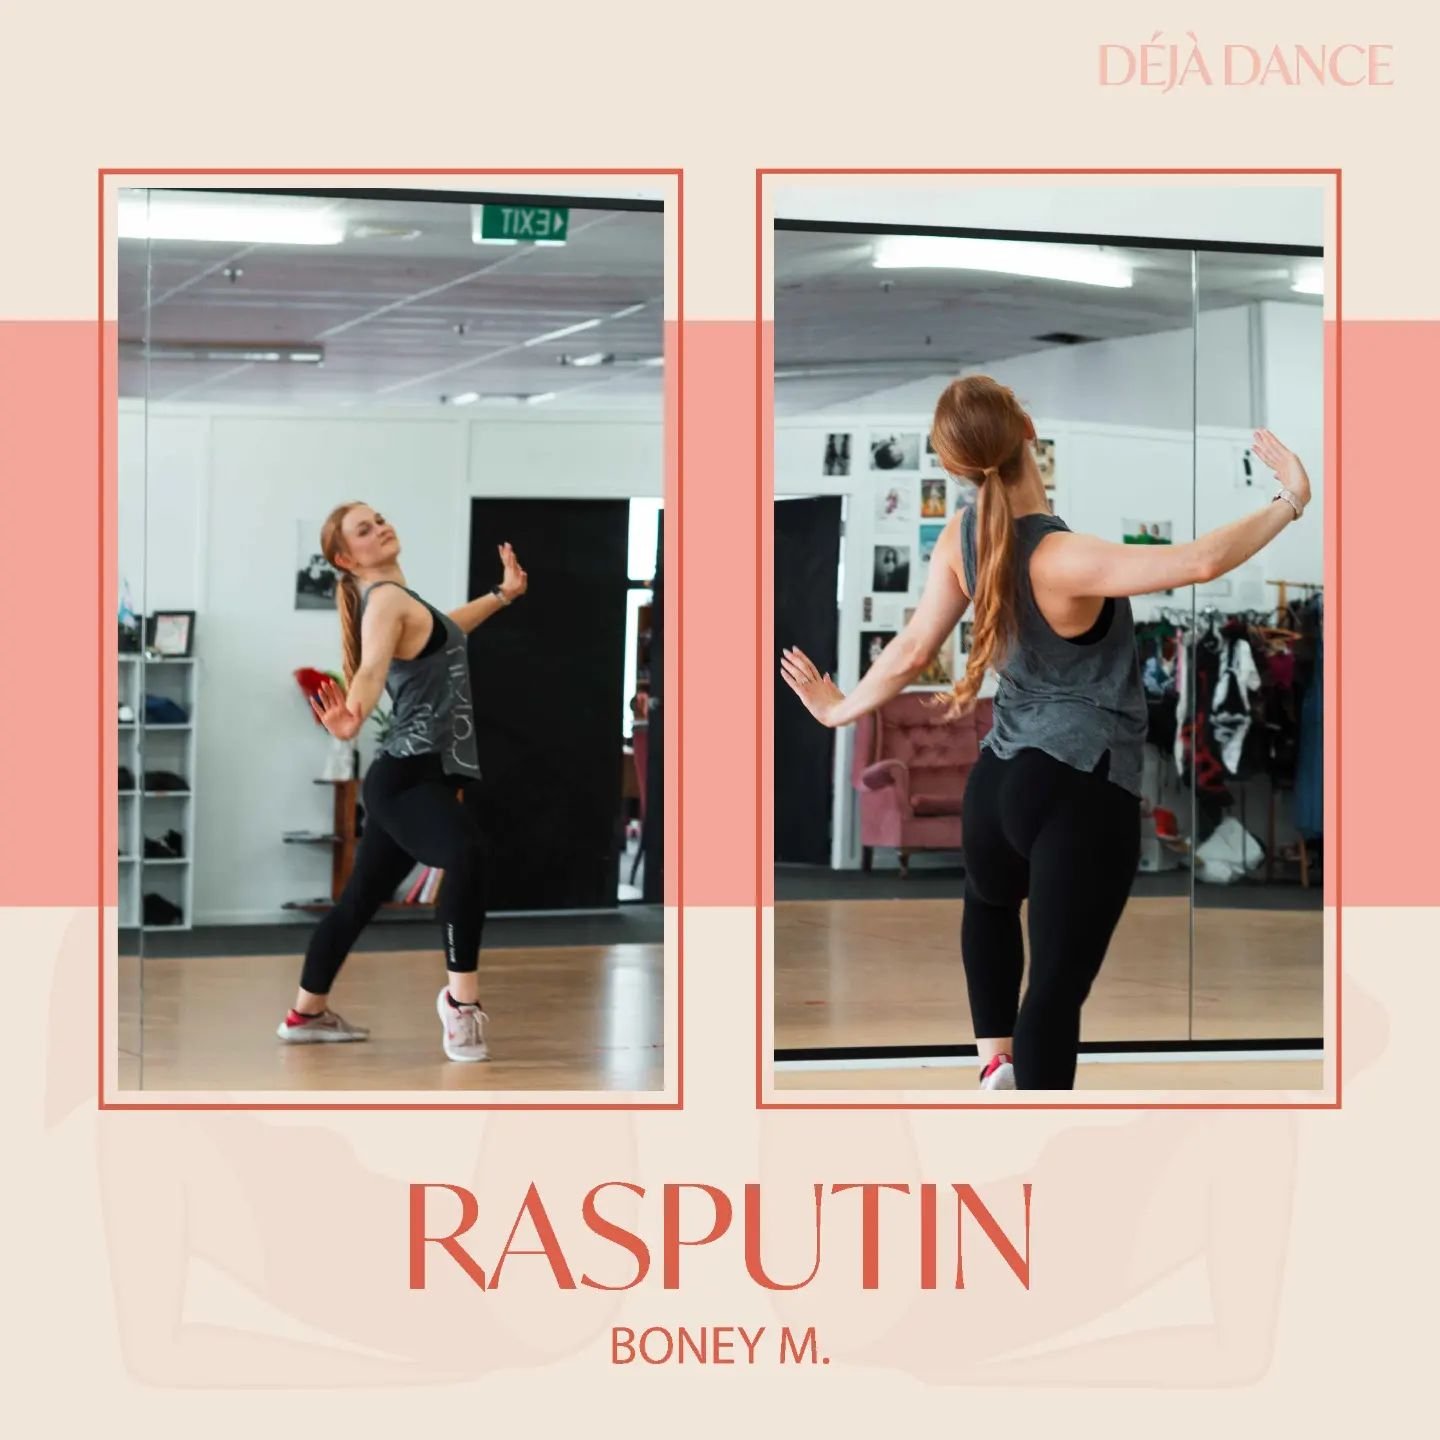 This Wednesday, we've got a stylized jazz routine to &quot;Rasputin&quot; by Boney M. You won't want to miss this one! 

However, Sophie's unfortunately picked up covid so Kristin from @kristin.reilly.dance is being an absolute legend and keeping the